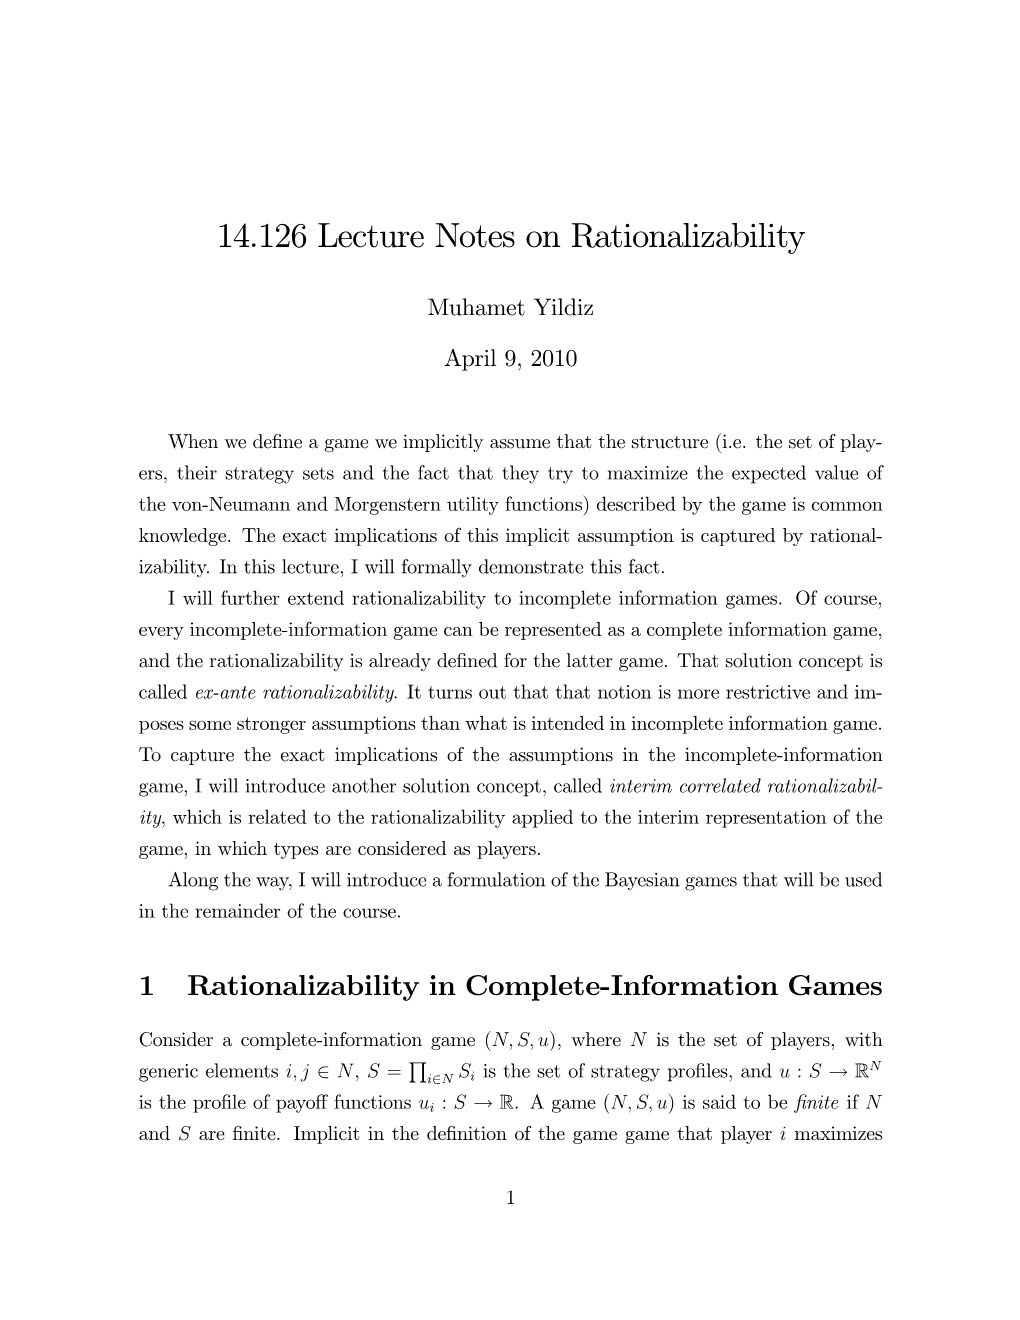 14.126 Lecture 9: Rationalizability and Correlated Equilibrium